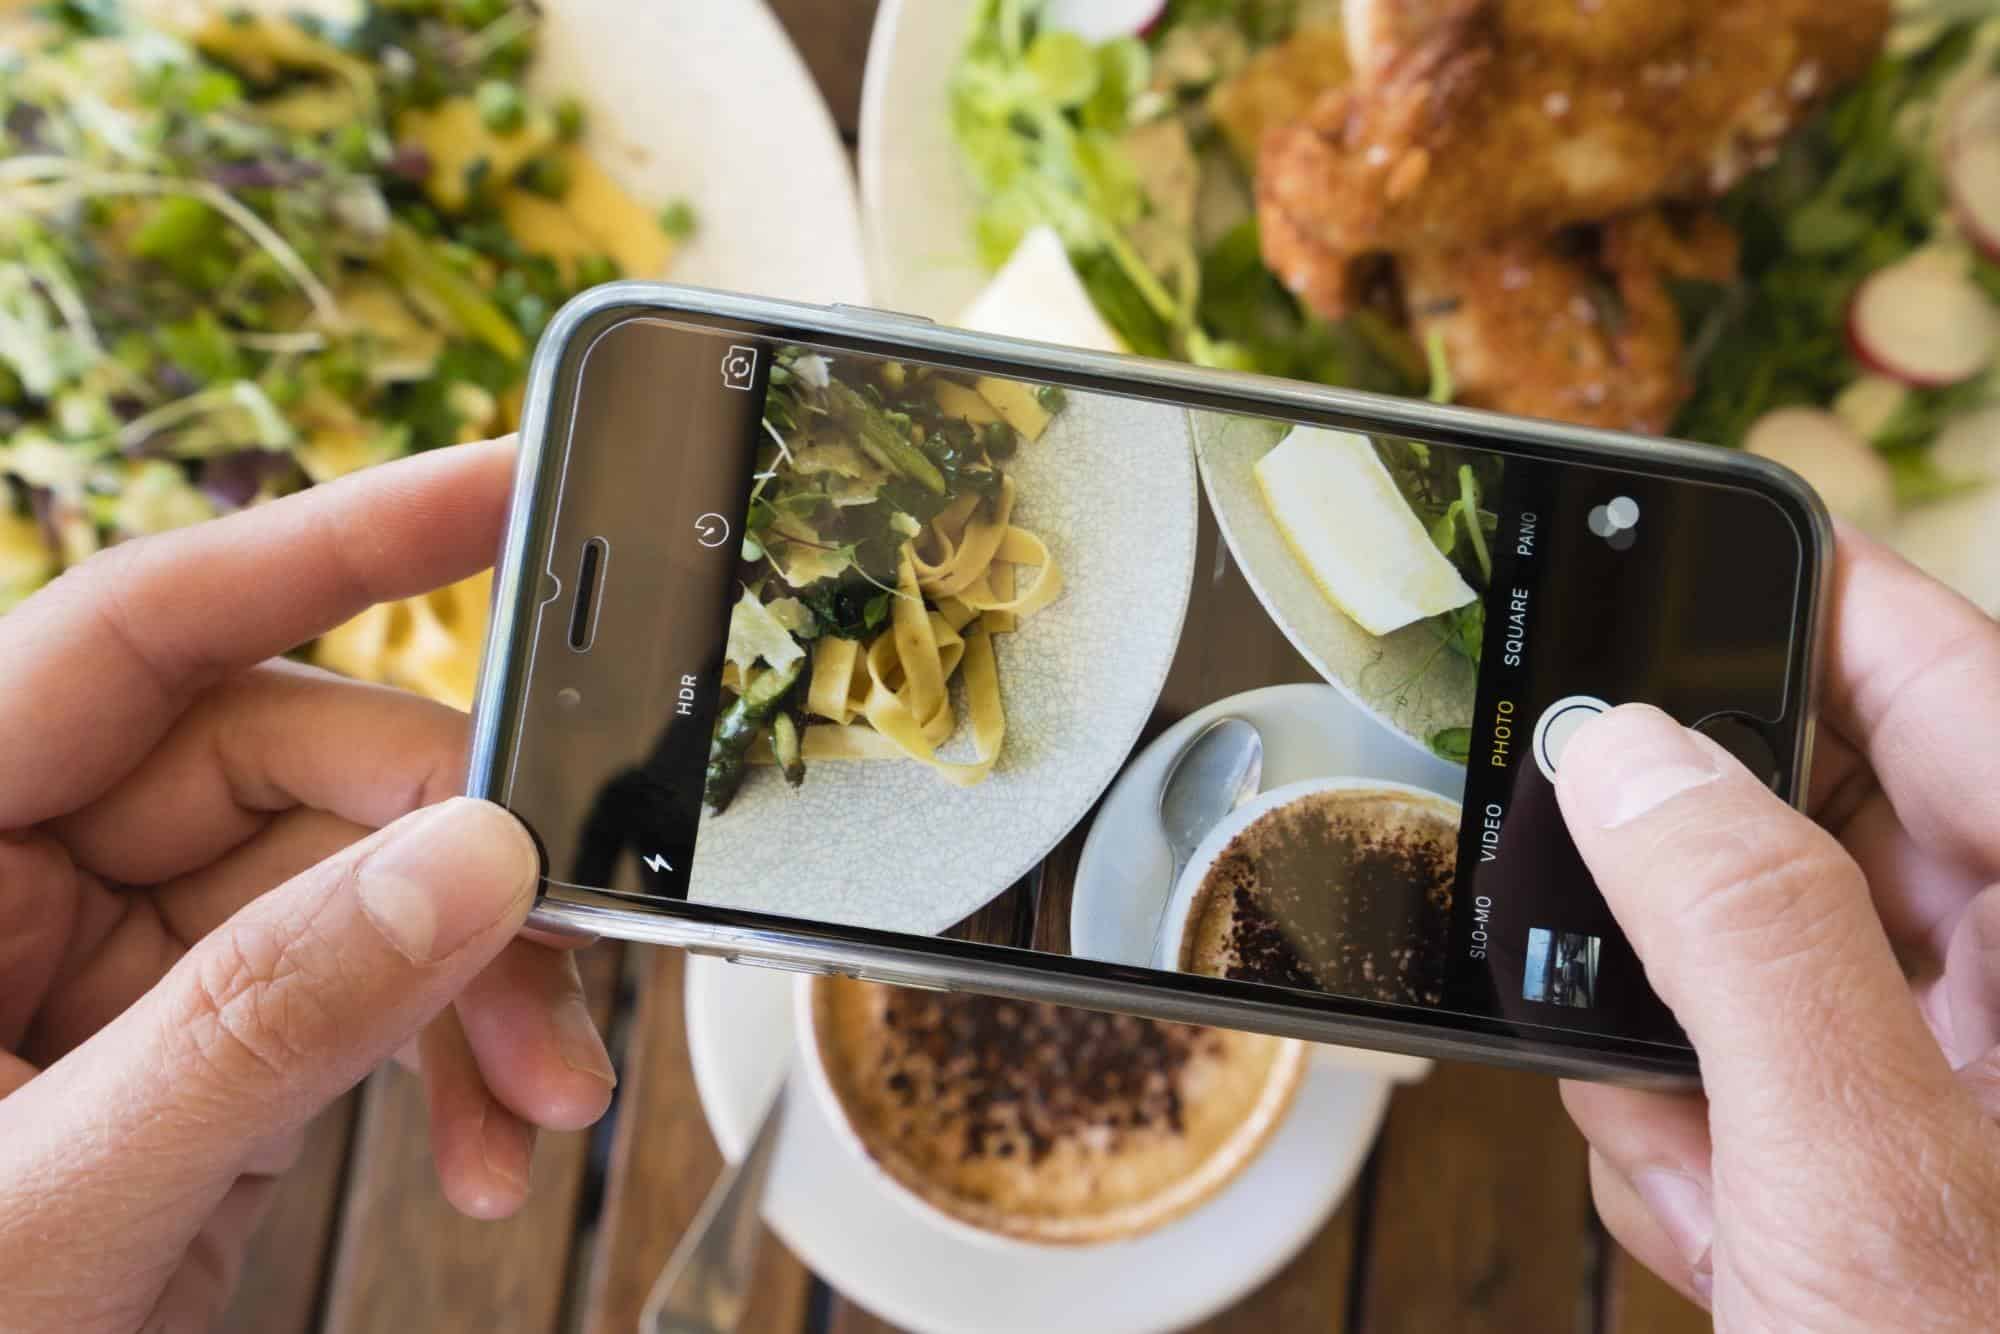 Taking photos of food with phone